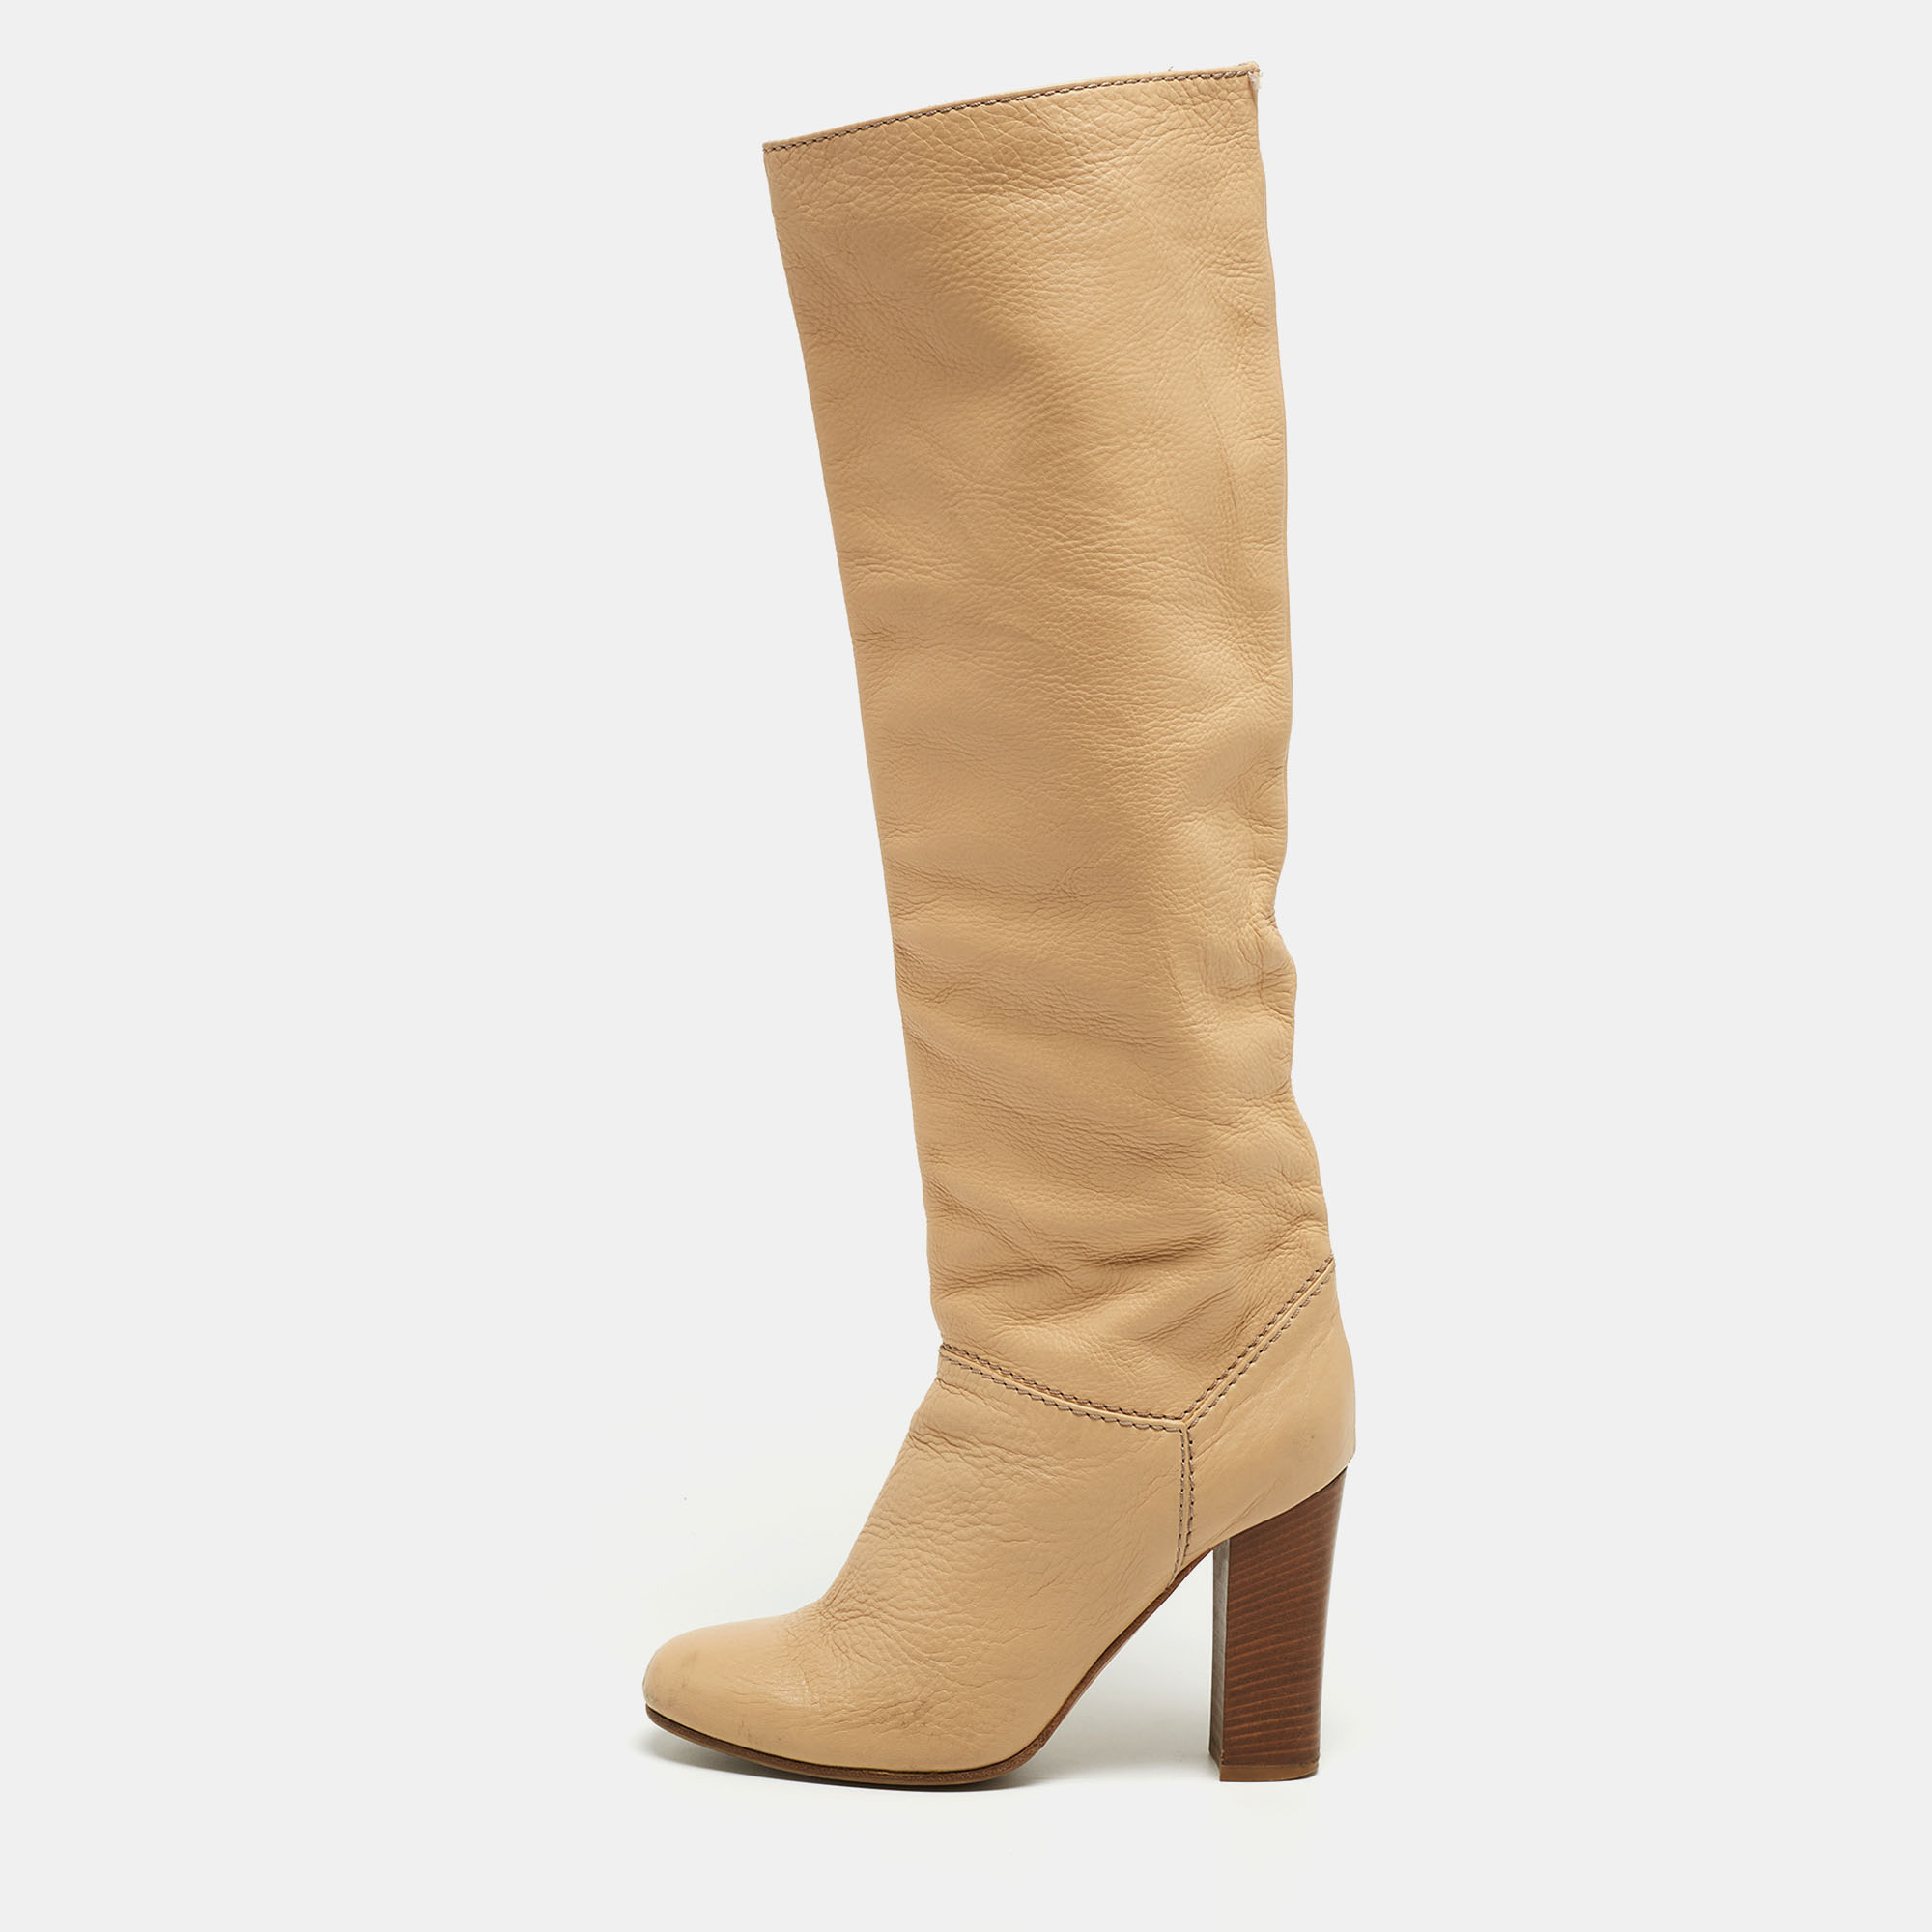 Pre-owned Chloé Beige Leather Knee Length Boots Size 38